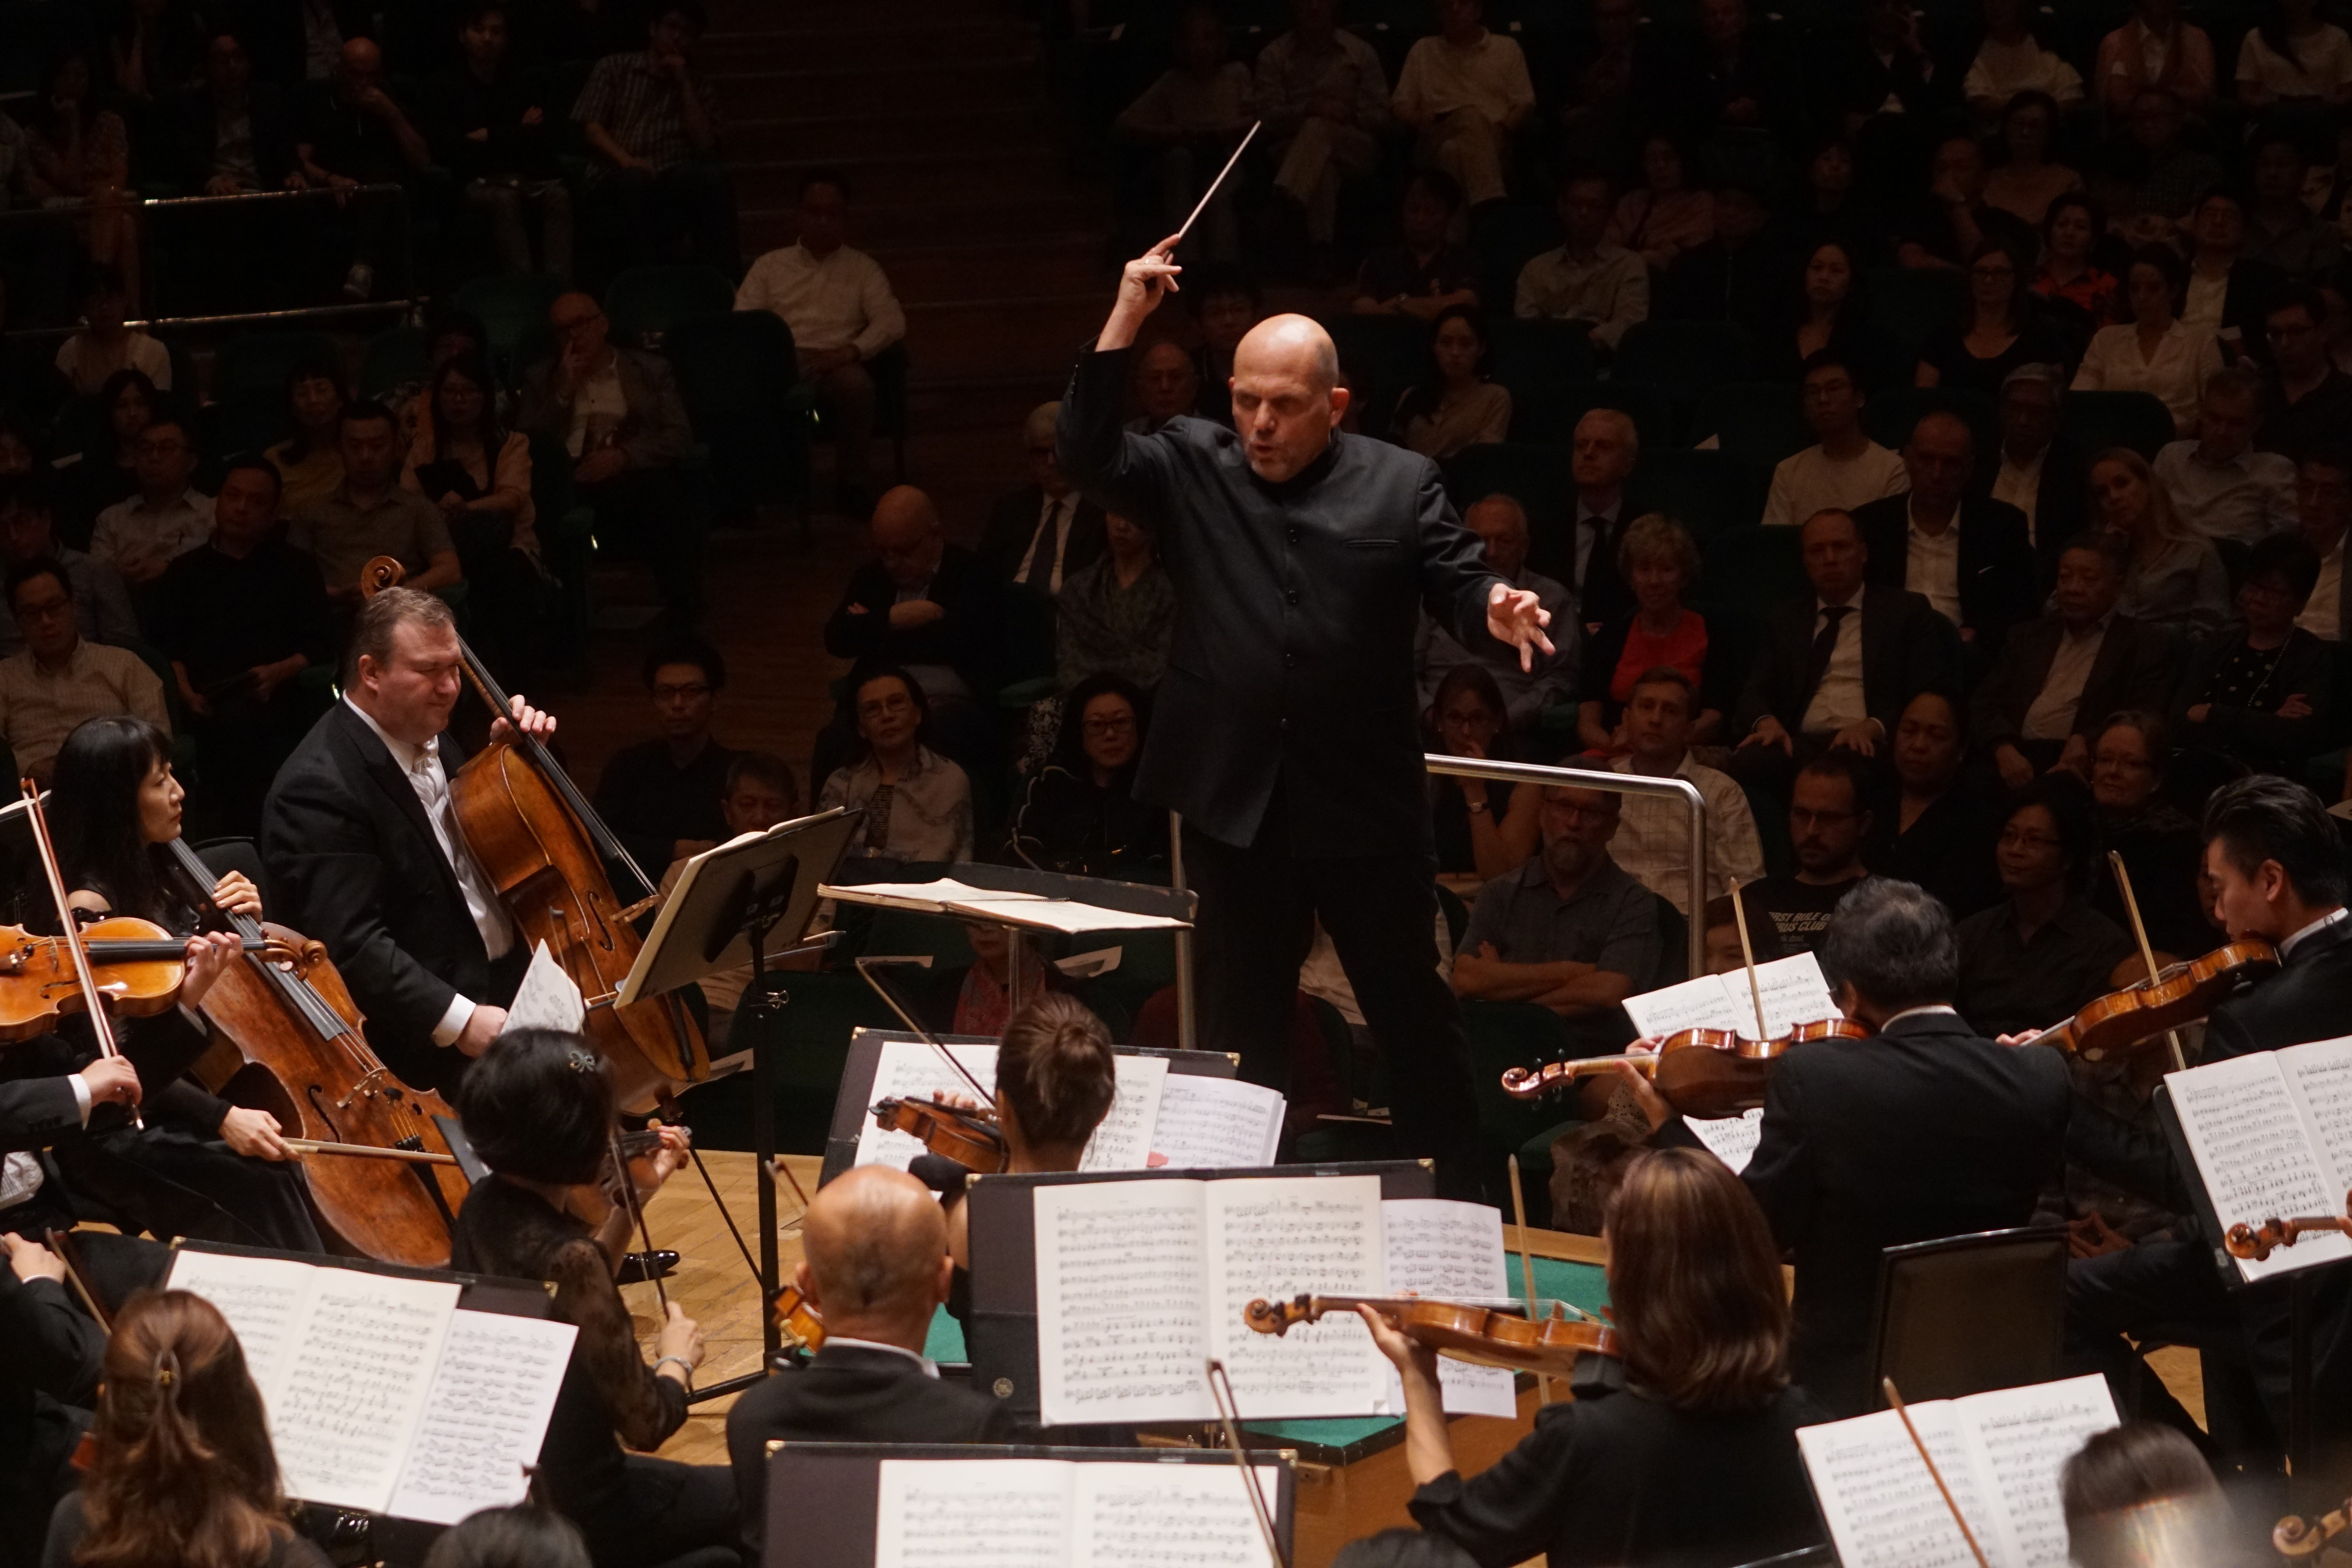 Jaap van Zweden was in his element conducting the Hong Kong Philharmonic Orchestra in Bruckner’s Symphony No. 8 in C Minor on Friday. Photo: Ka Lam/Hong Kong Philharmonic Orchestra